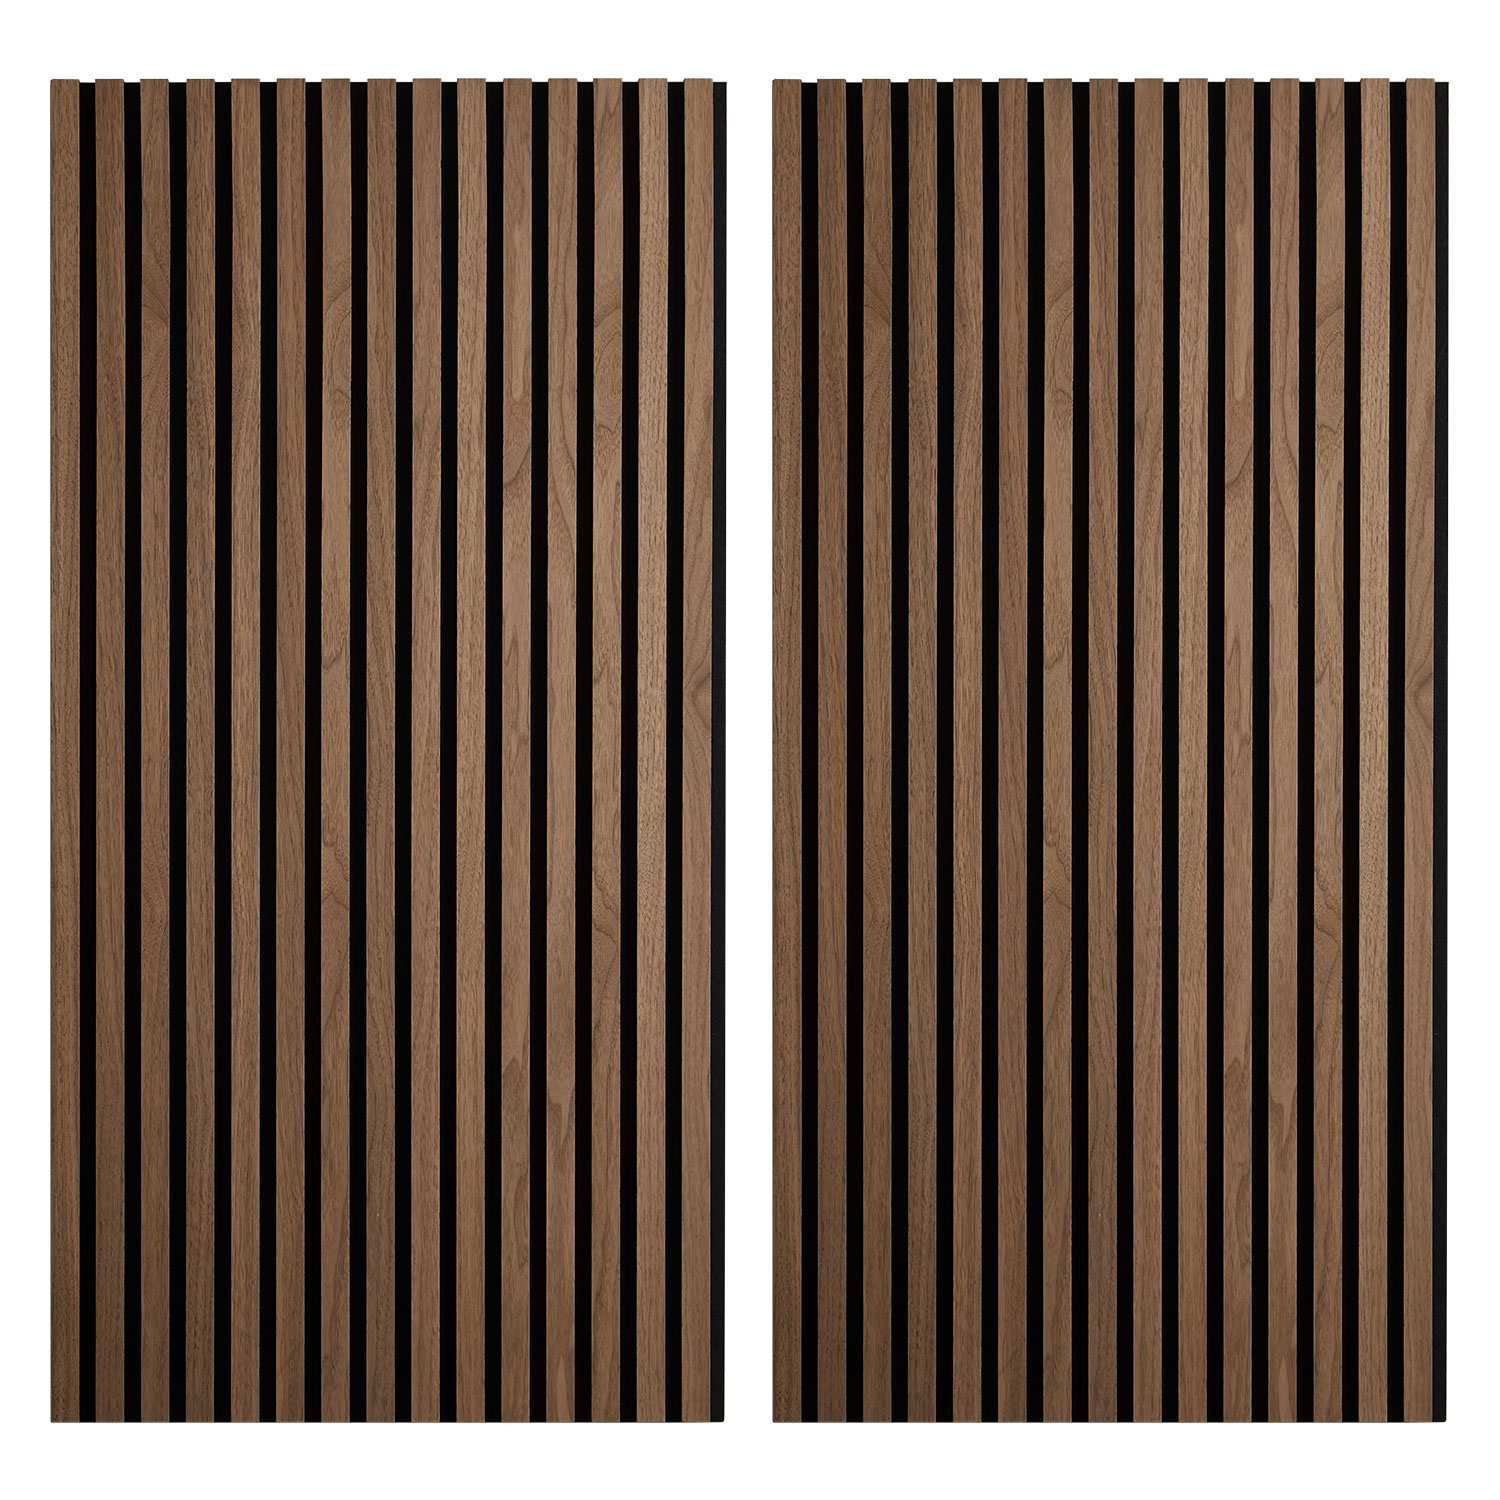 2 Wall panels 60 x 120 cm Brown Wood paneling for walls Acoustic panels Bedroom paneling Wall cladding Acoustic sound panels Sound proof panels